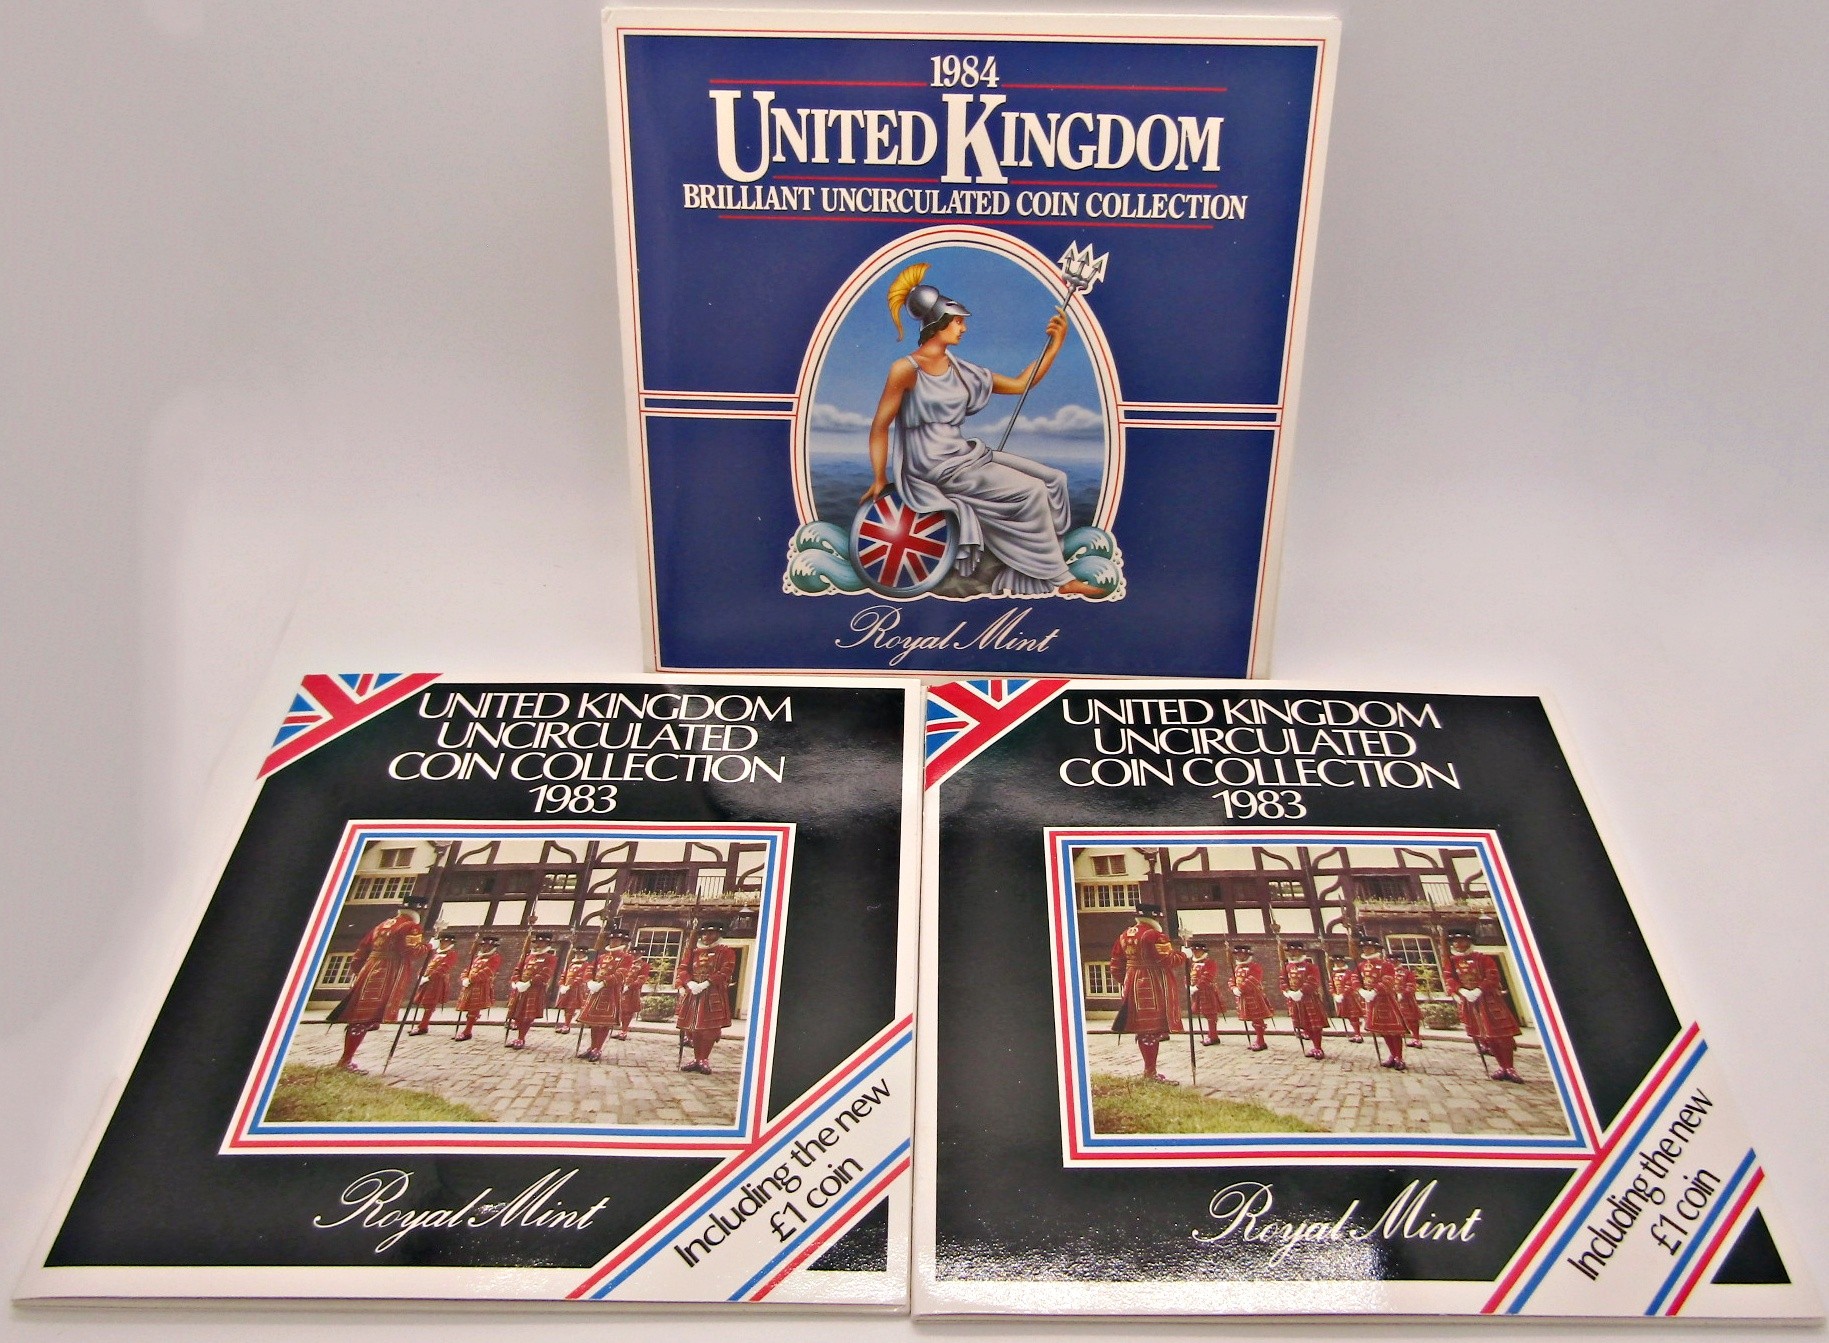 UK Brilliant uncirculated coin collections - 1982 x 2, 1983 x 3, 1984, 1985, 1986, 1987 - £1 - ½p - Image 3 of 3